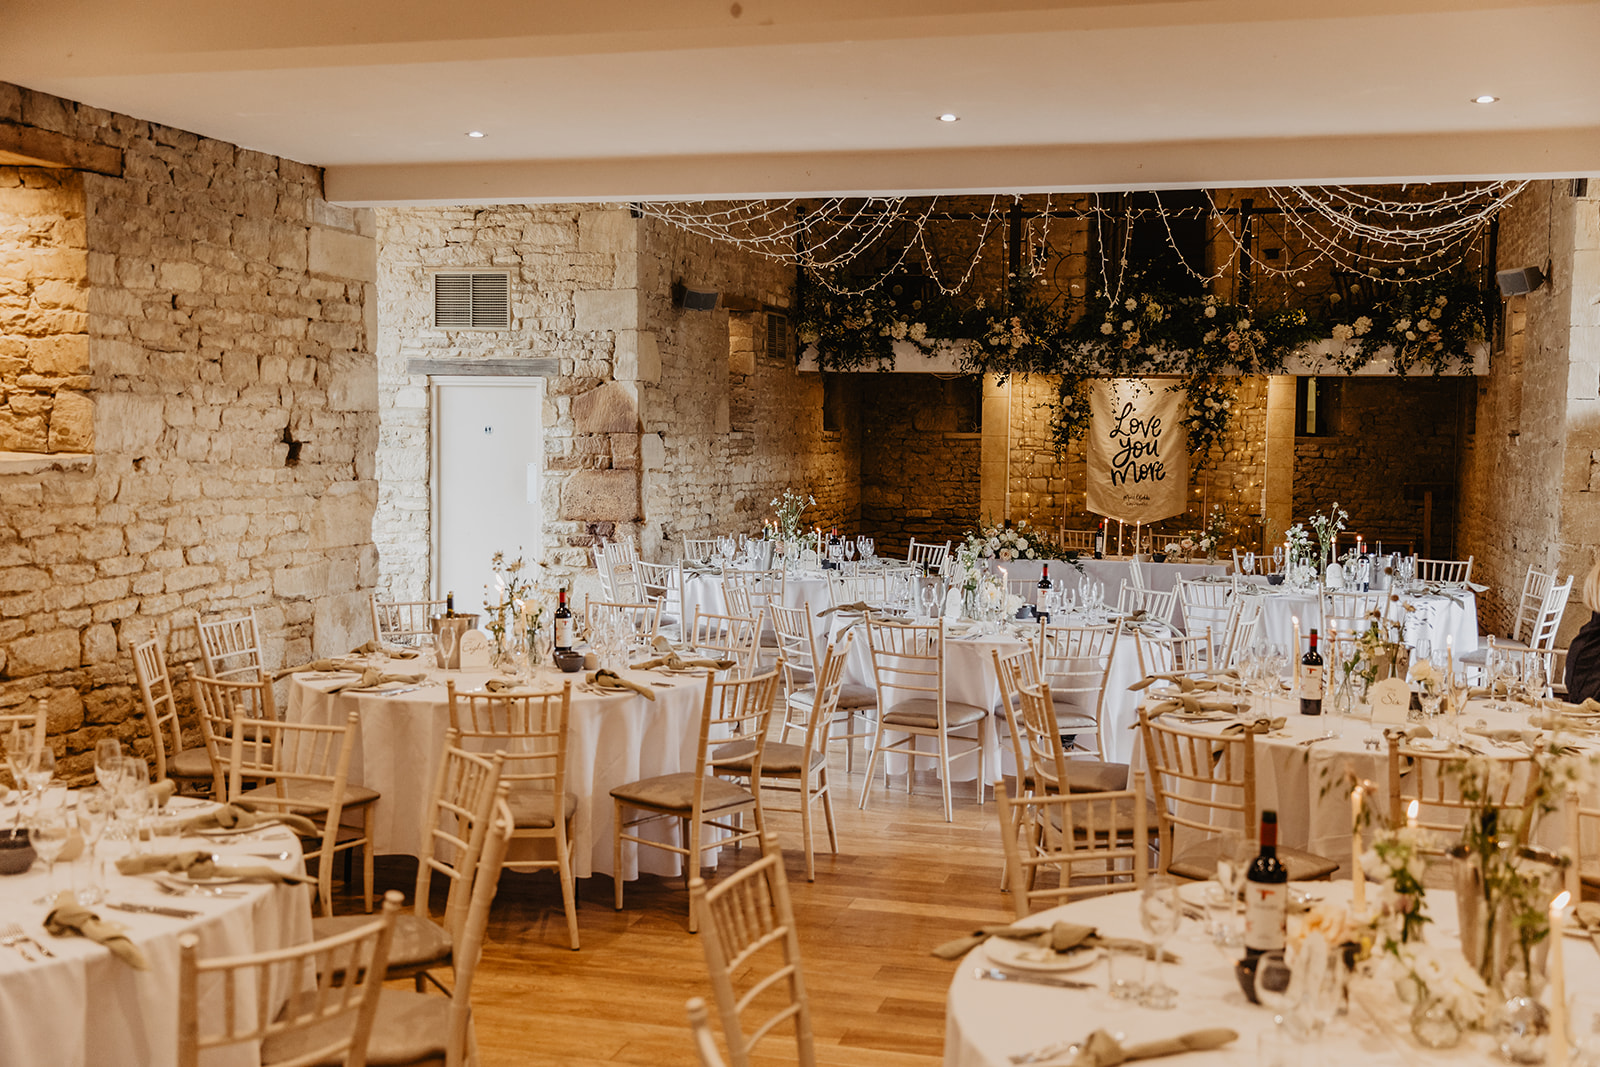 Reception at a Great Tythe Barn Wedding, Cotswolds. By Olive Joy Photography.